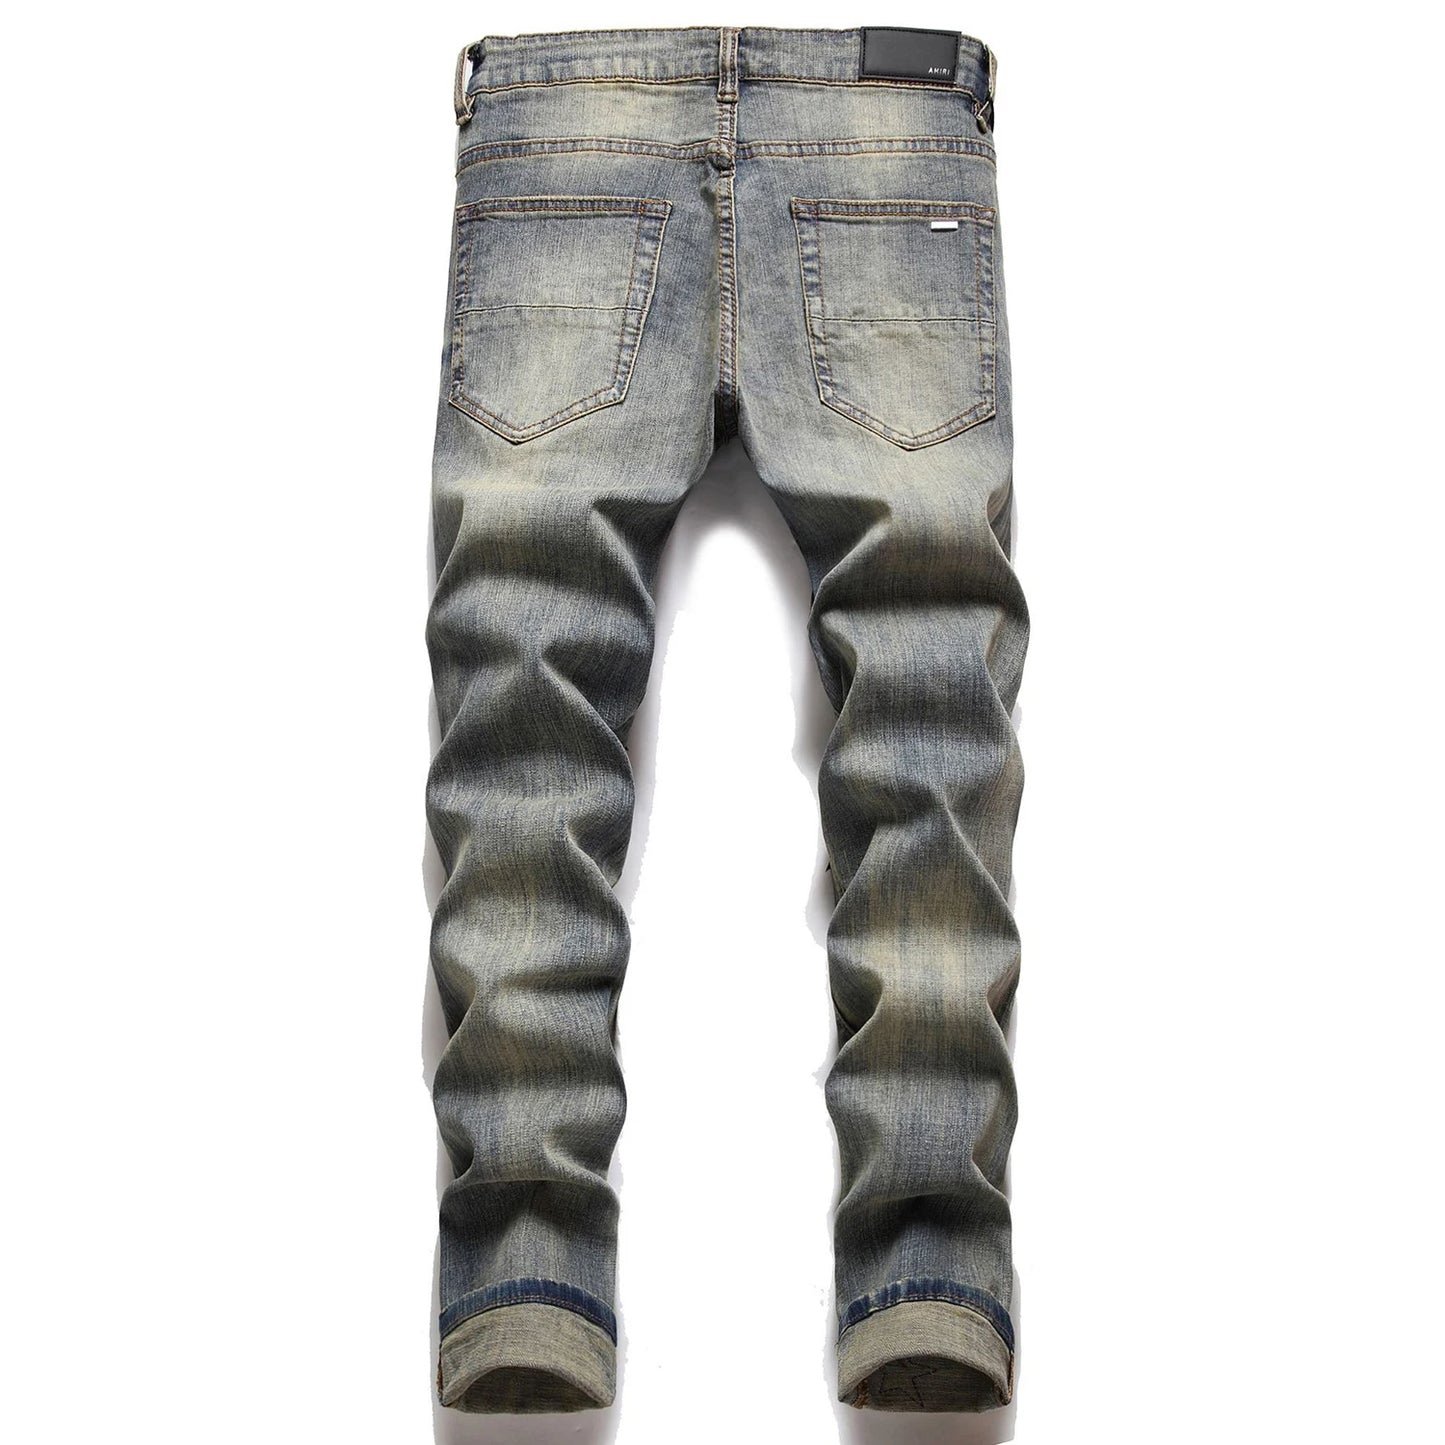 High Quality Men’s Slim-fit Hole Ripped Blue Jeans,Light Luxury Embroidery Decorating Hip Hop Jeans,Stylish Sexy Street Jeans;